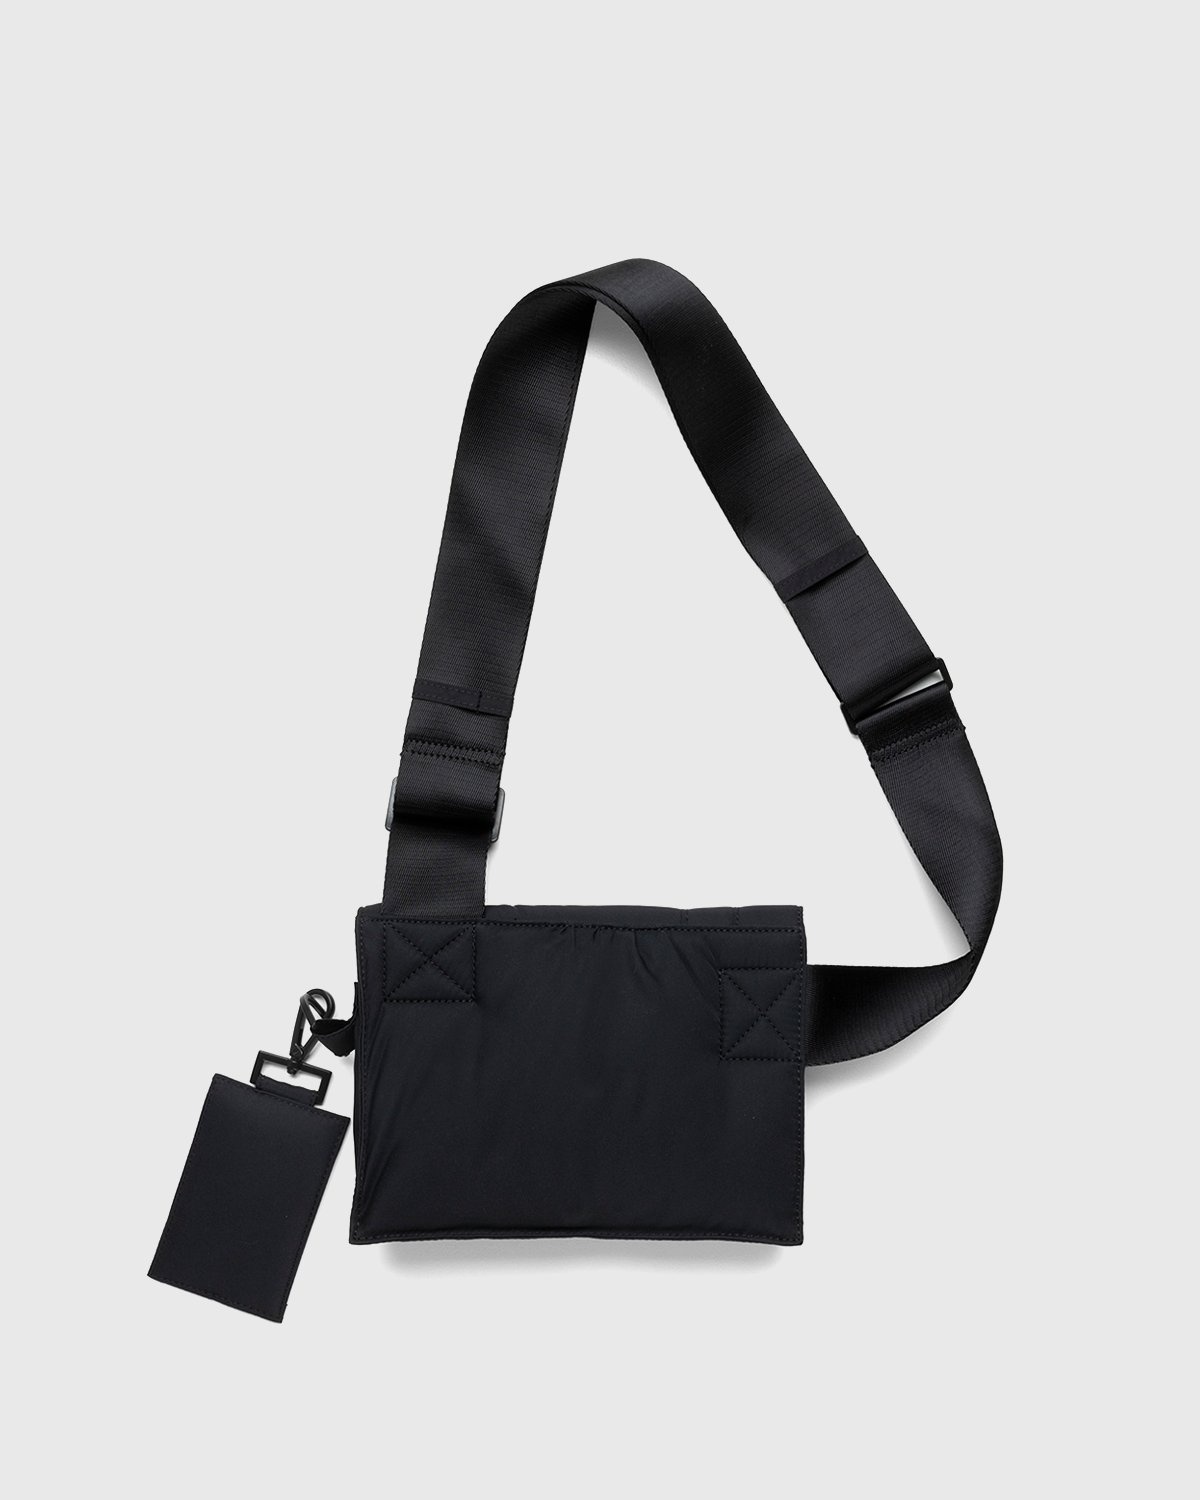 A-Cold-Wall* – Convect Holster Bag Black - Bags - Black - Image 2